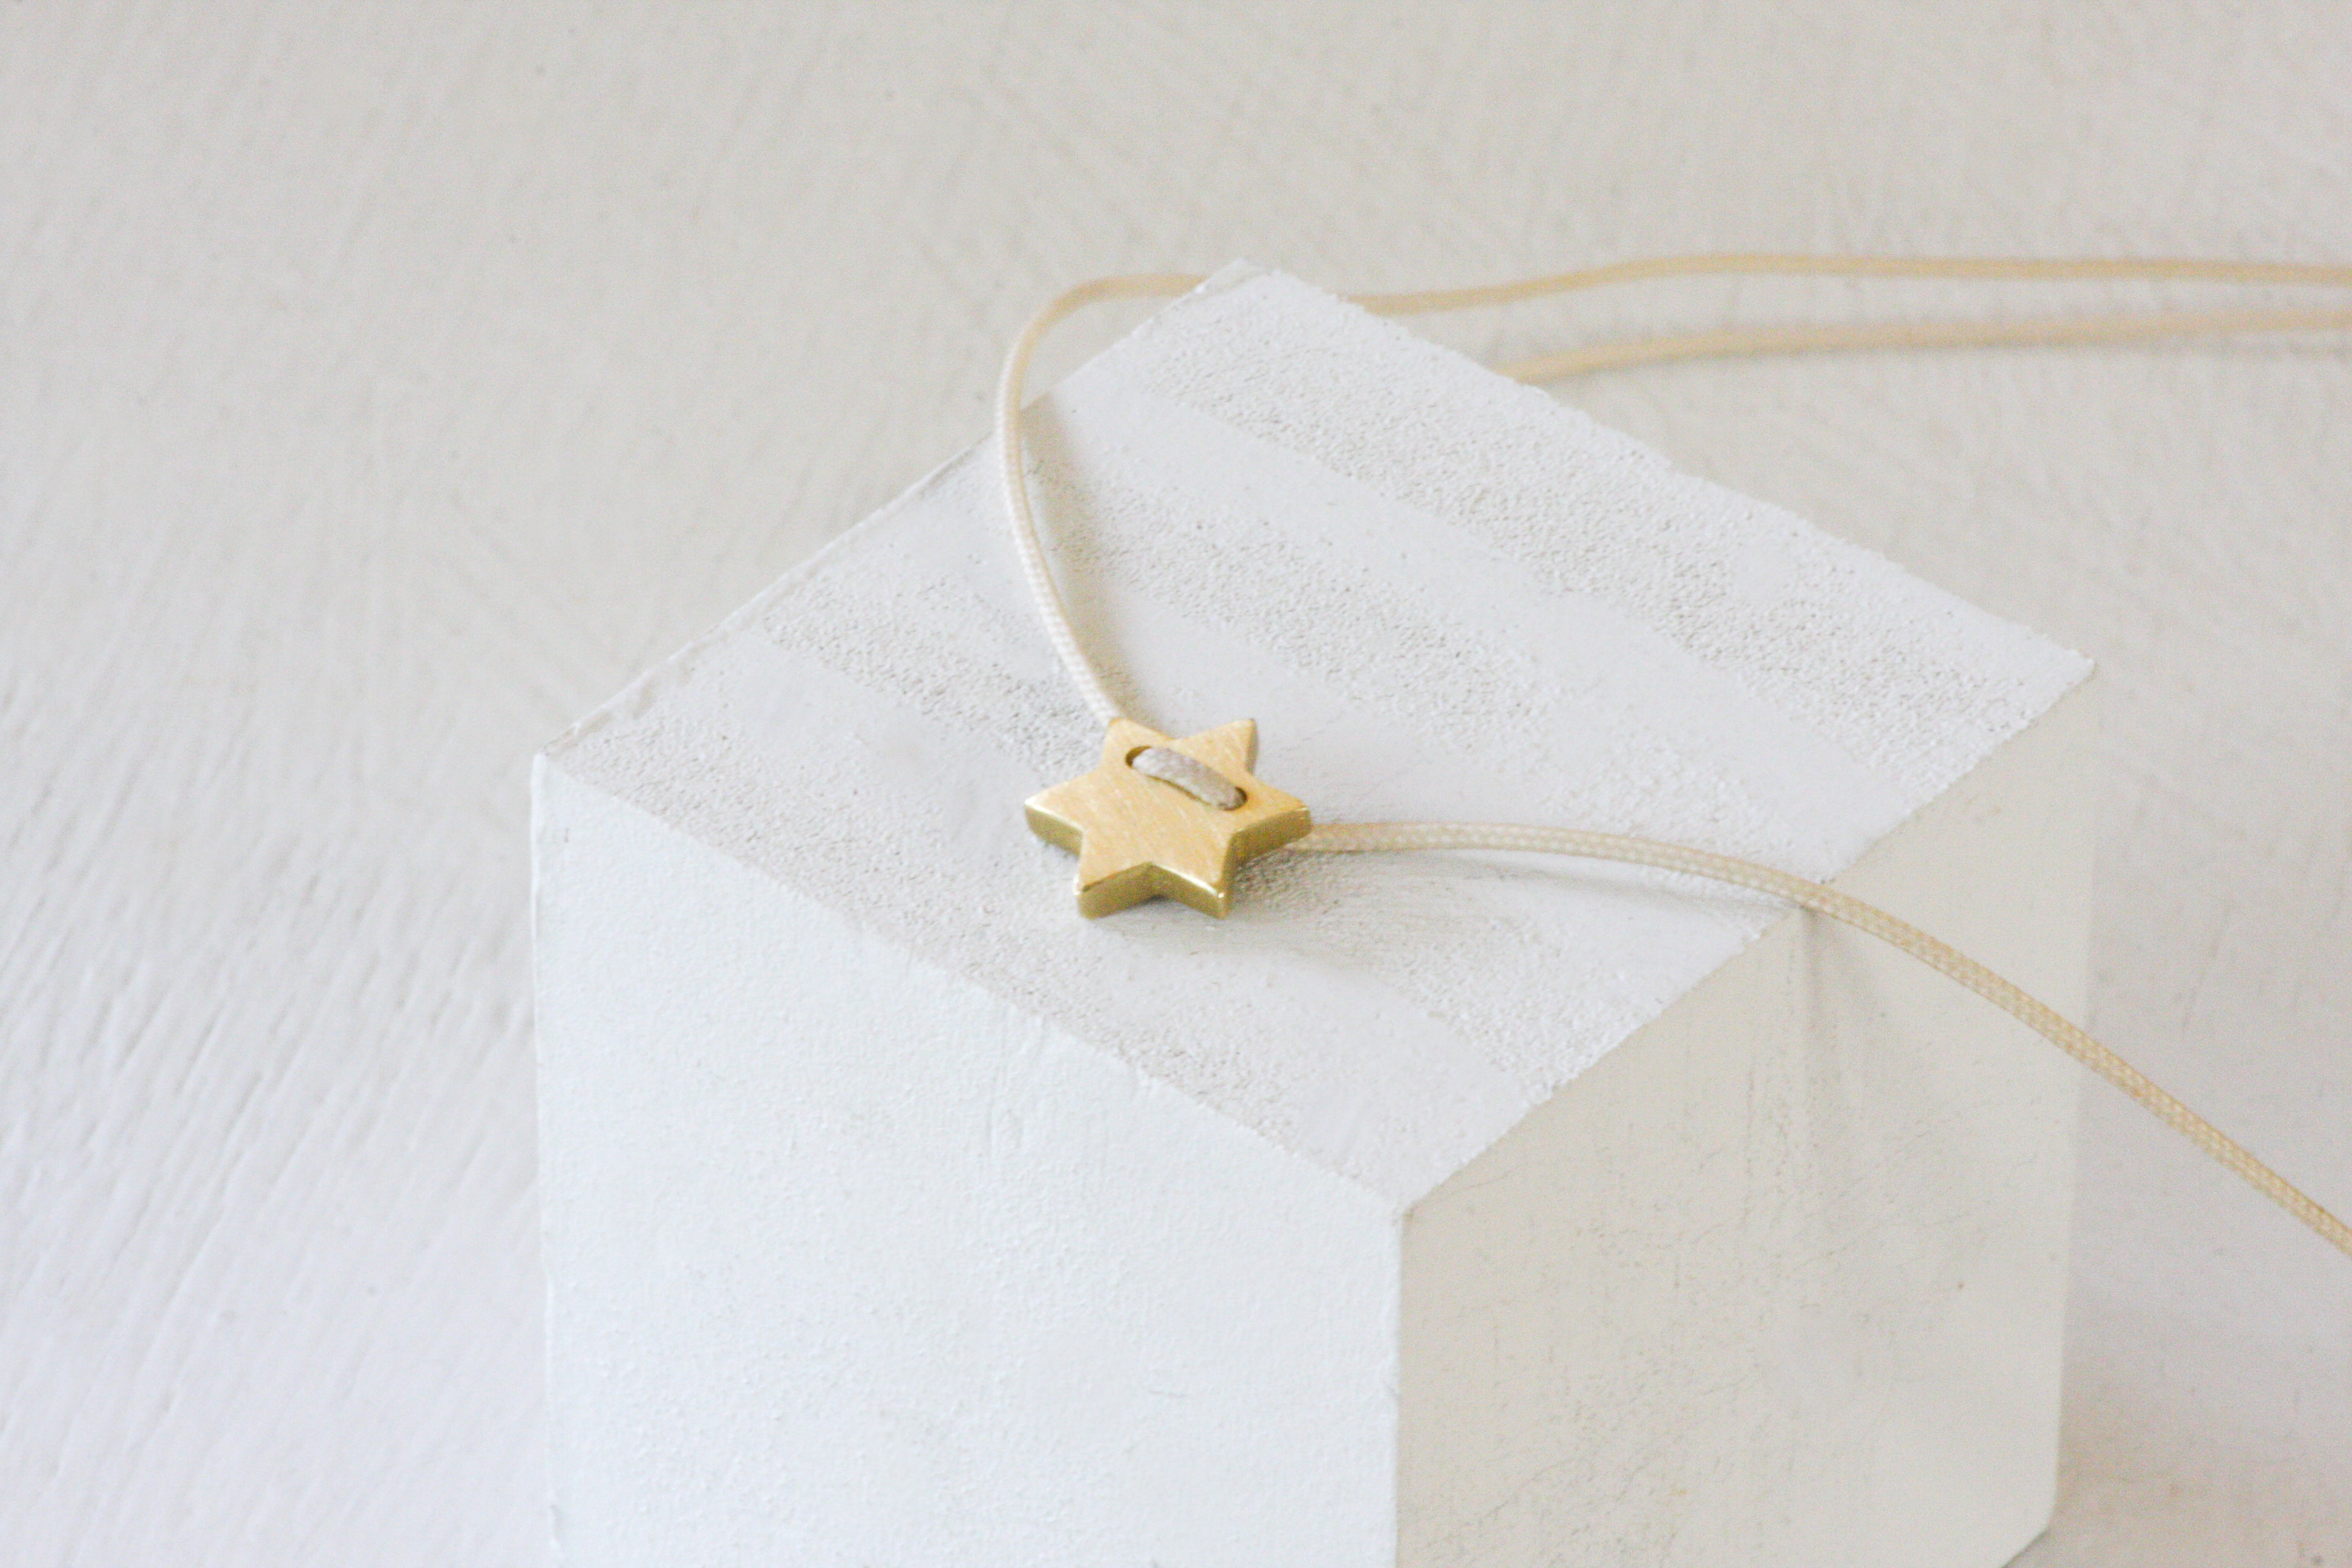 Star Of David on a wire / Magen David Gold Pendant